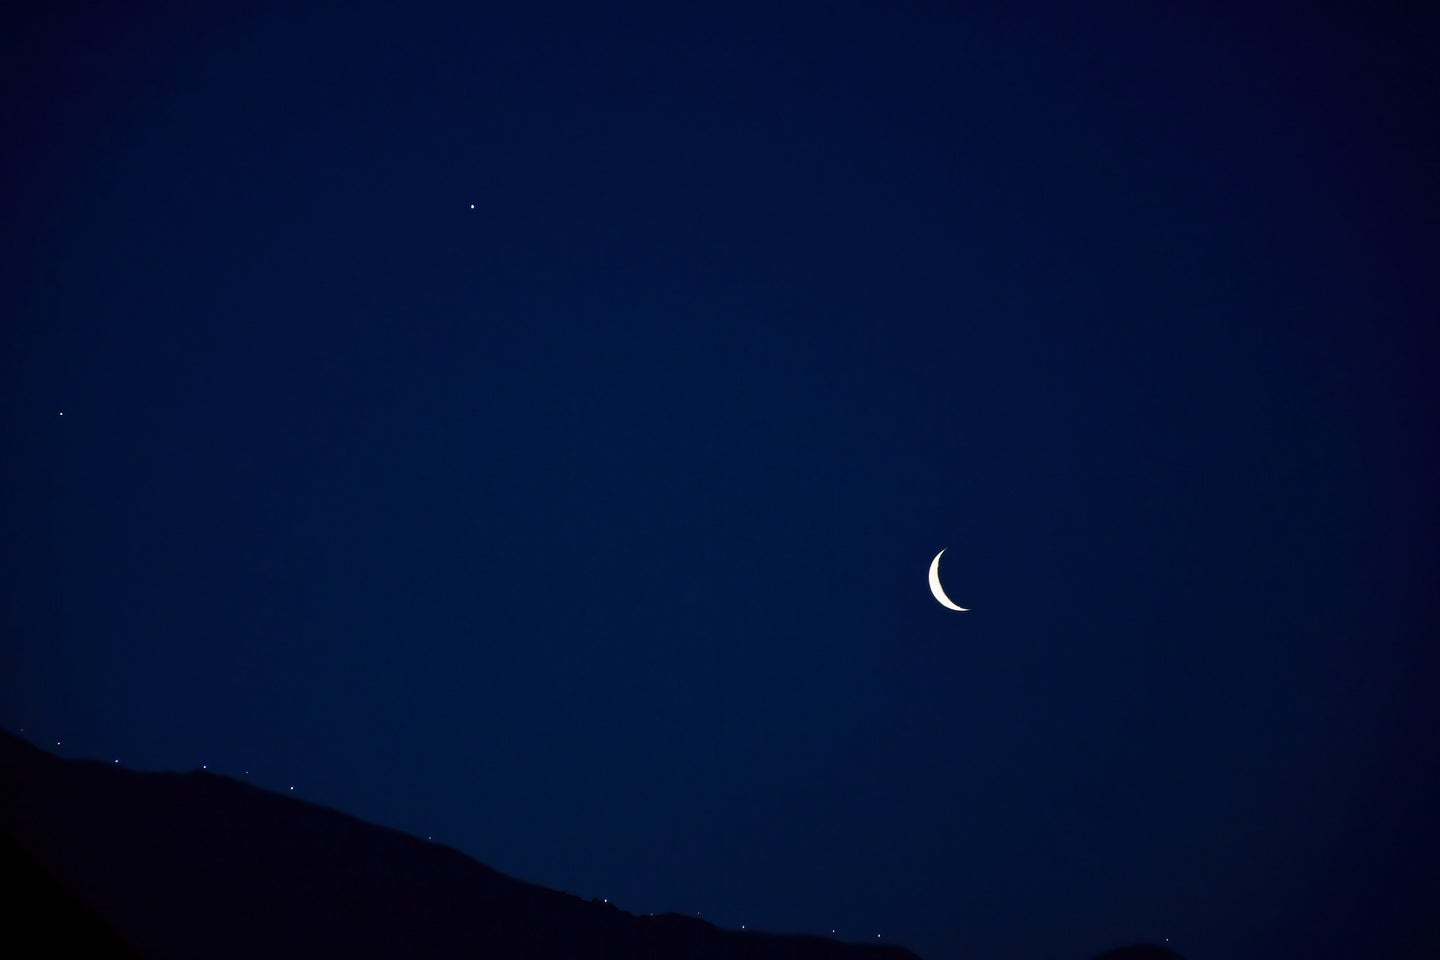 Venus next to a crescent moon during 2022 planet alignment